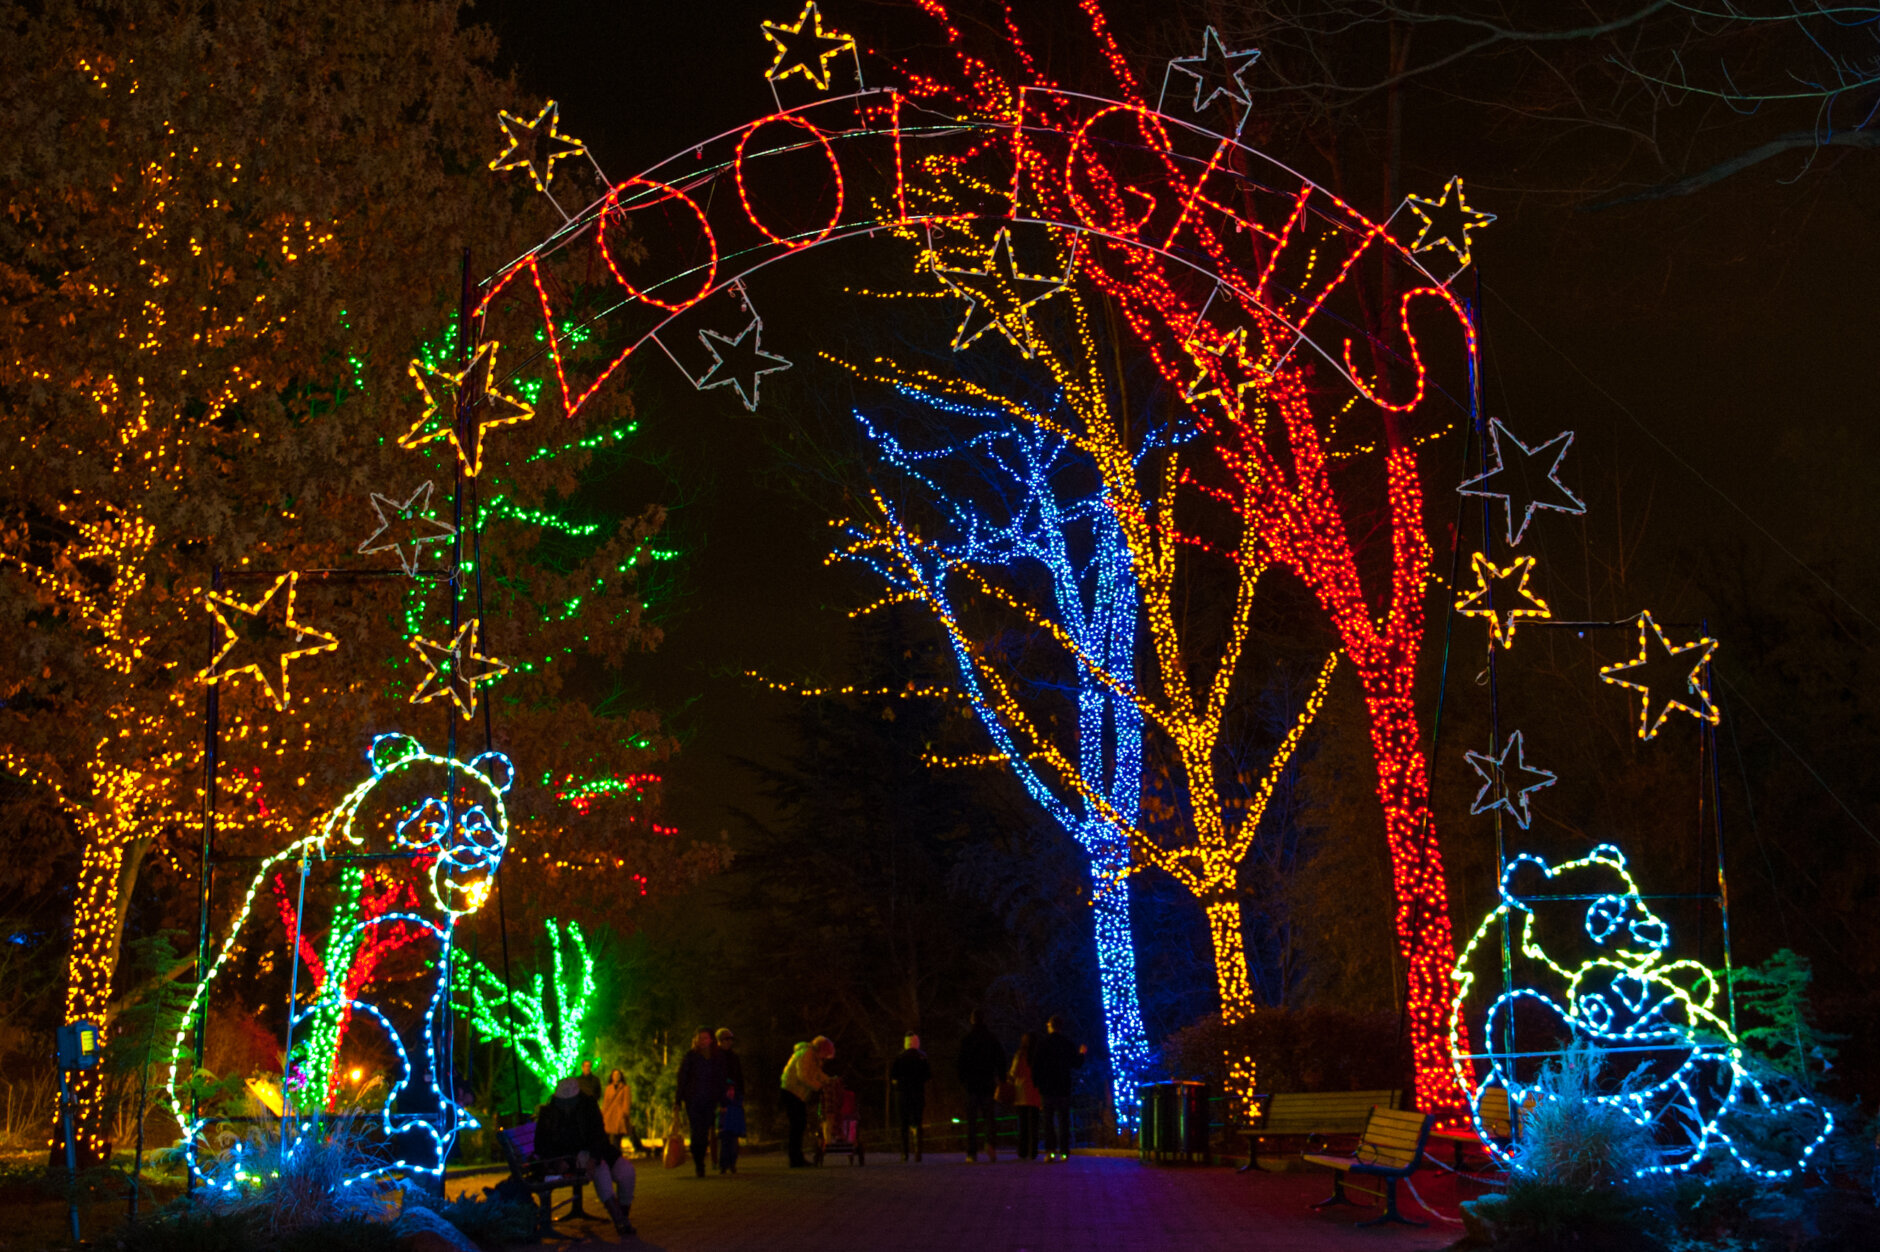 <p><strong>ZooLights</strong></p>
<p>Beginning Nov. 29 and running through Jan. 1, the Smithsonian National Zoo tradition features more than a half-million eco-friendly lights. This year&#8217;s event includes a gingerbread village, a holiday market and rides on the Zoo Choo-Choo. Admission is free, and the show runs from 5 to 9 p.m. More information is available on the zoo&#8217;s <a href="https://nationalzoo.si.edu/events/zoolights" target="_blank" rel="noopener">website</a>.</p>
